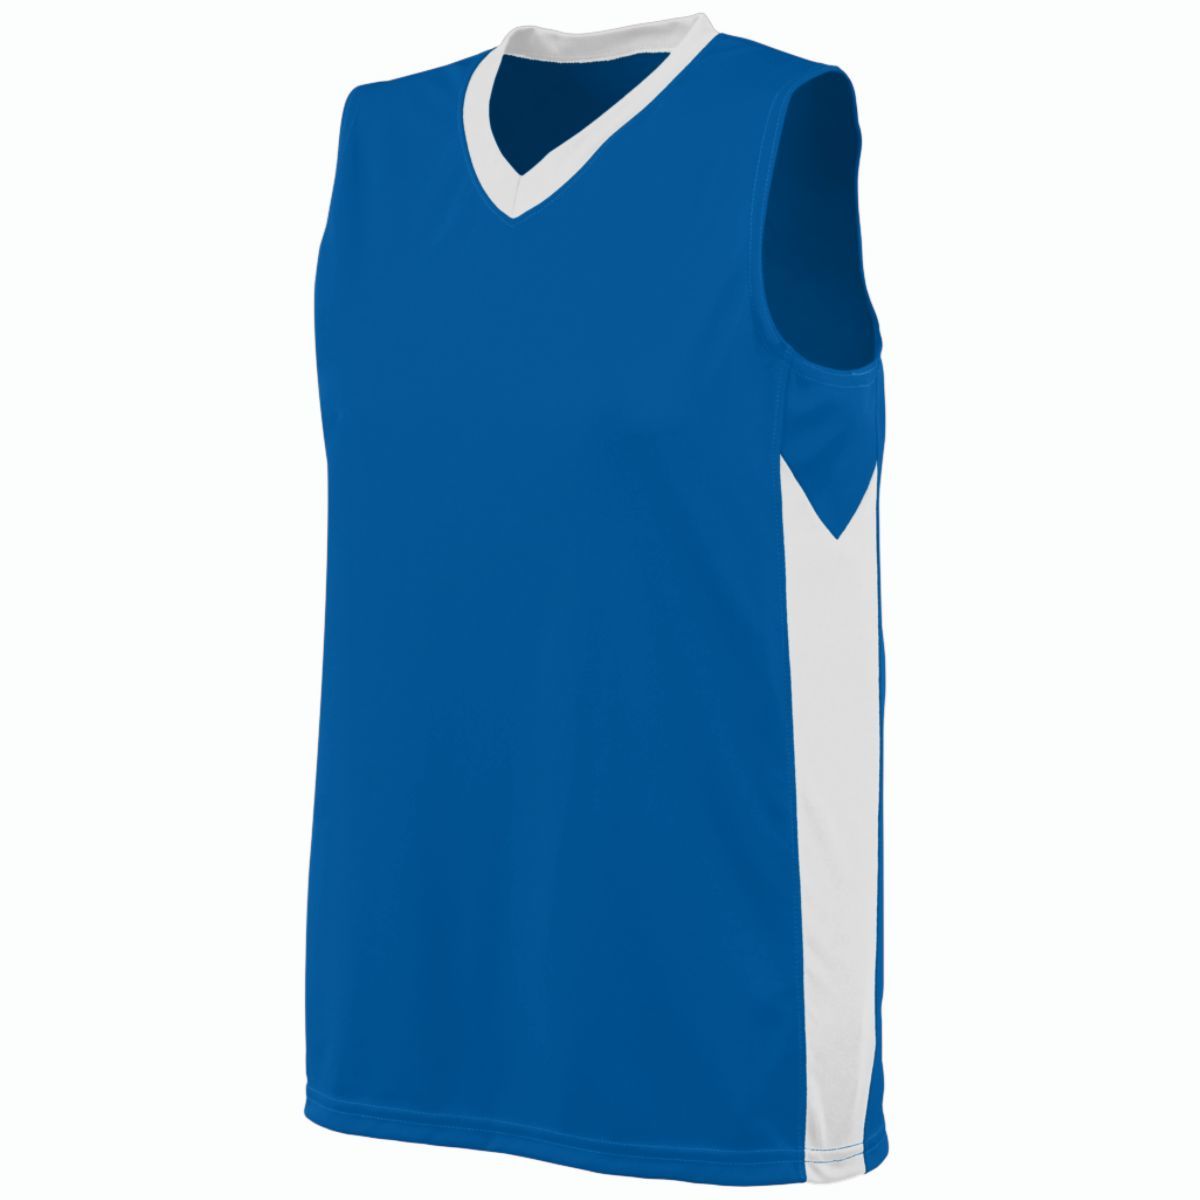 Augusta Sportswear Ladies Block Out Jersey in Royal/White  -Part of the Ladies, Ladies-Jersey, Augusta-Products, Basketball, Shirts, All-Sports, All-Sports-1 product lines at KanaleyCreations.com